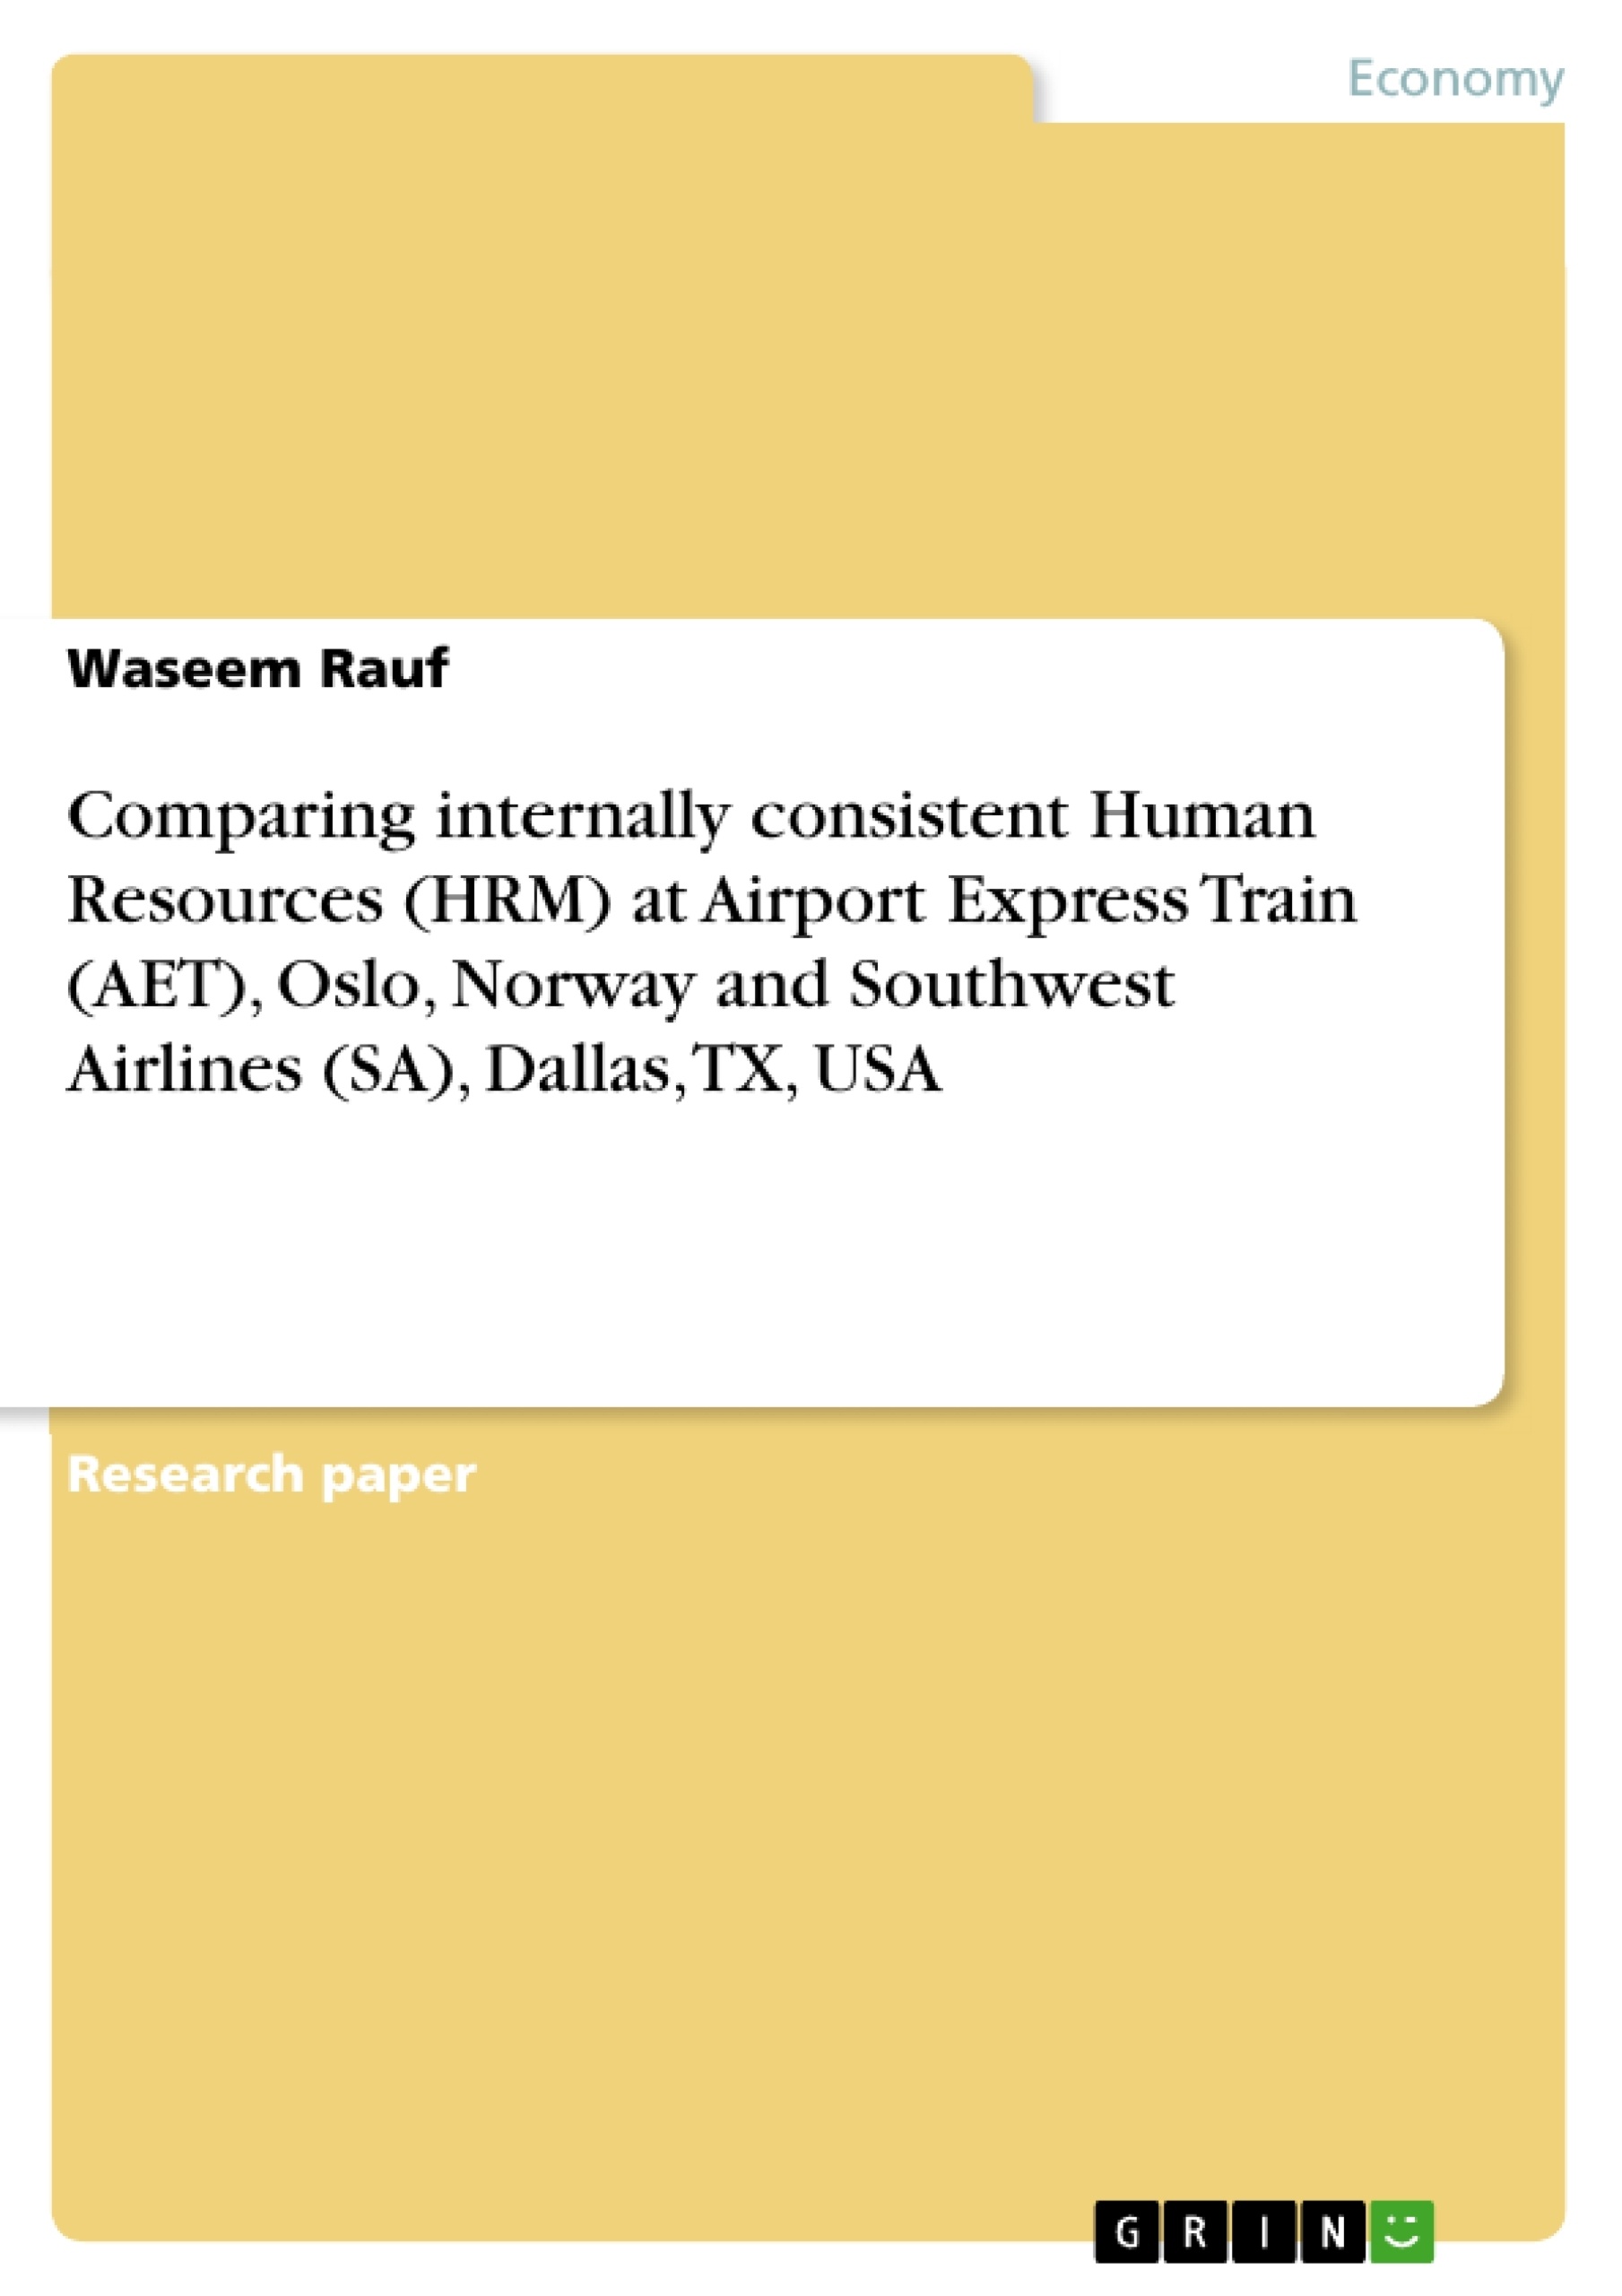 Titre: Comparing internally consistent Human Resources (HRM) at Airport Express Train (AET), Oslo, Norway and Southwest Airlines (SA), Dallas, TX, USA